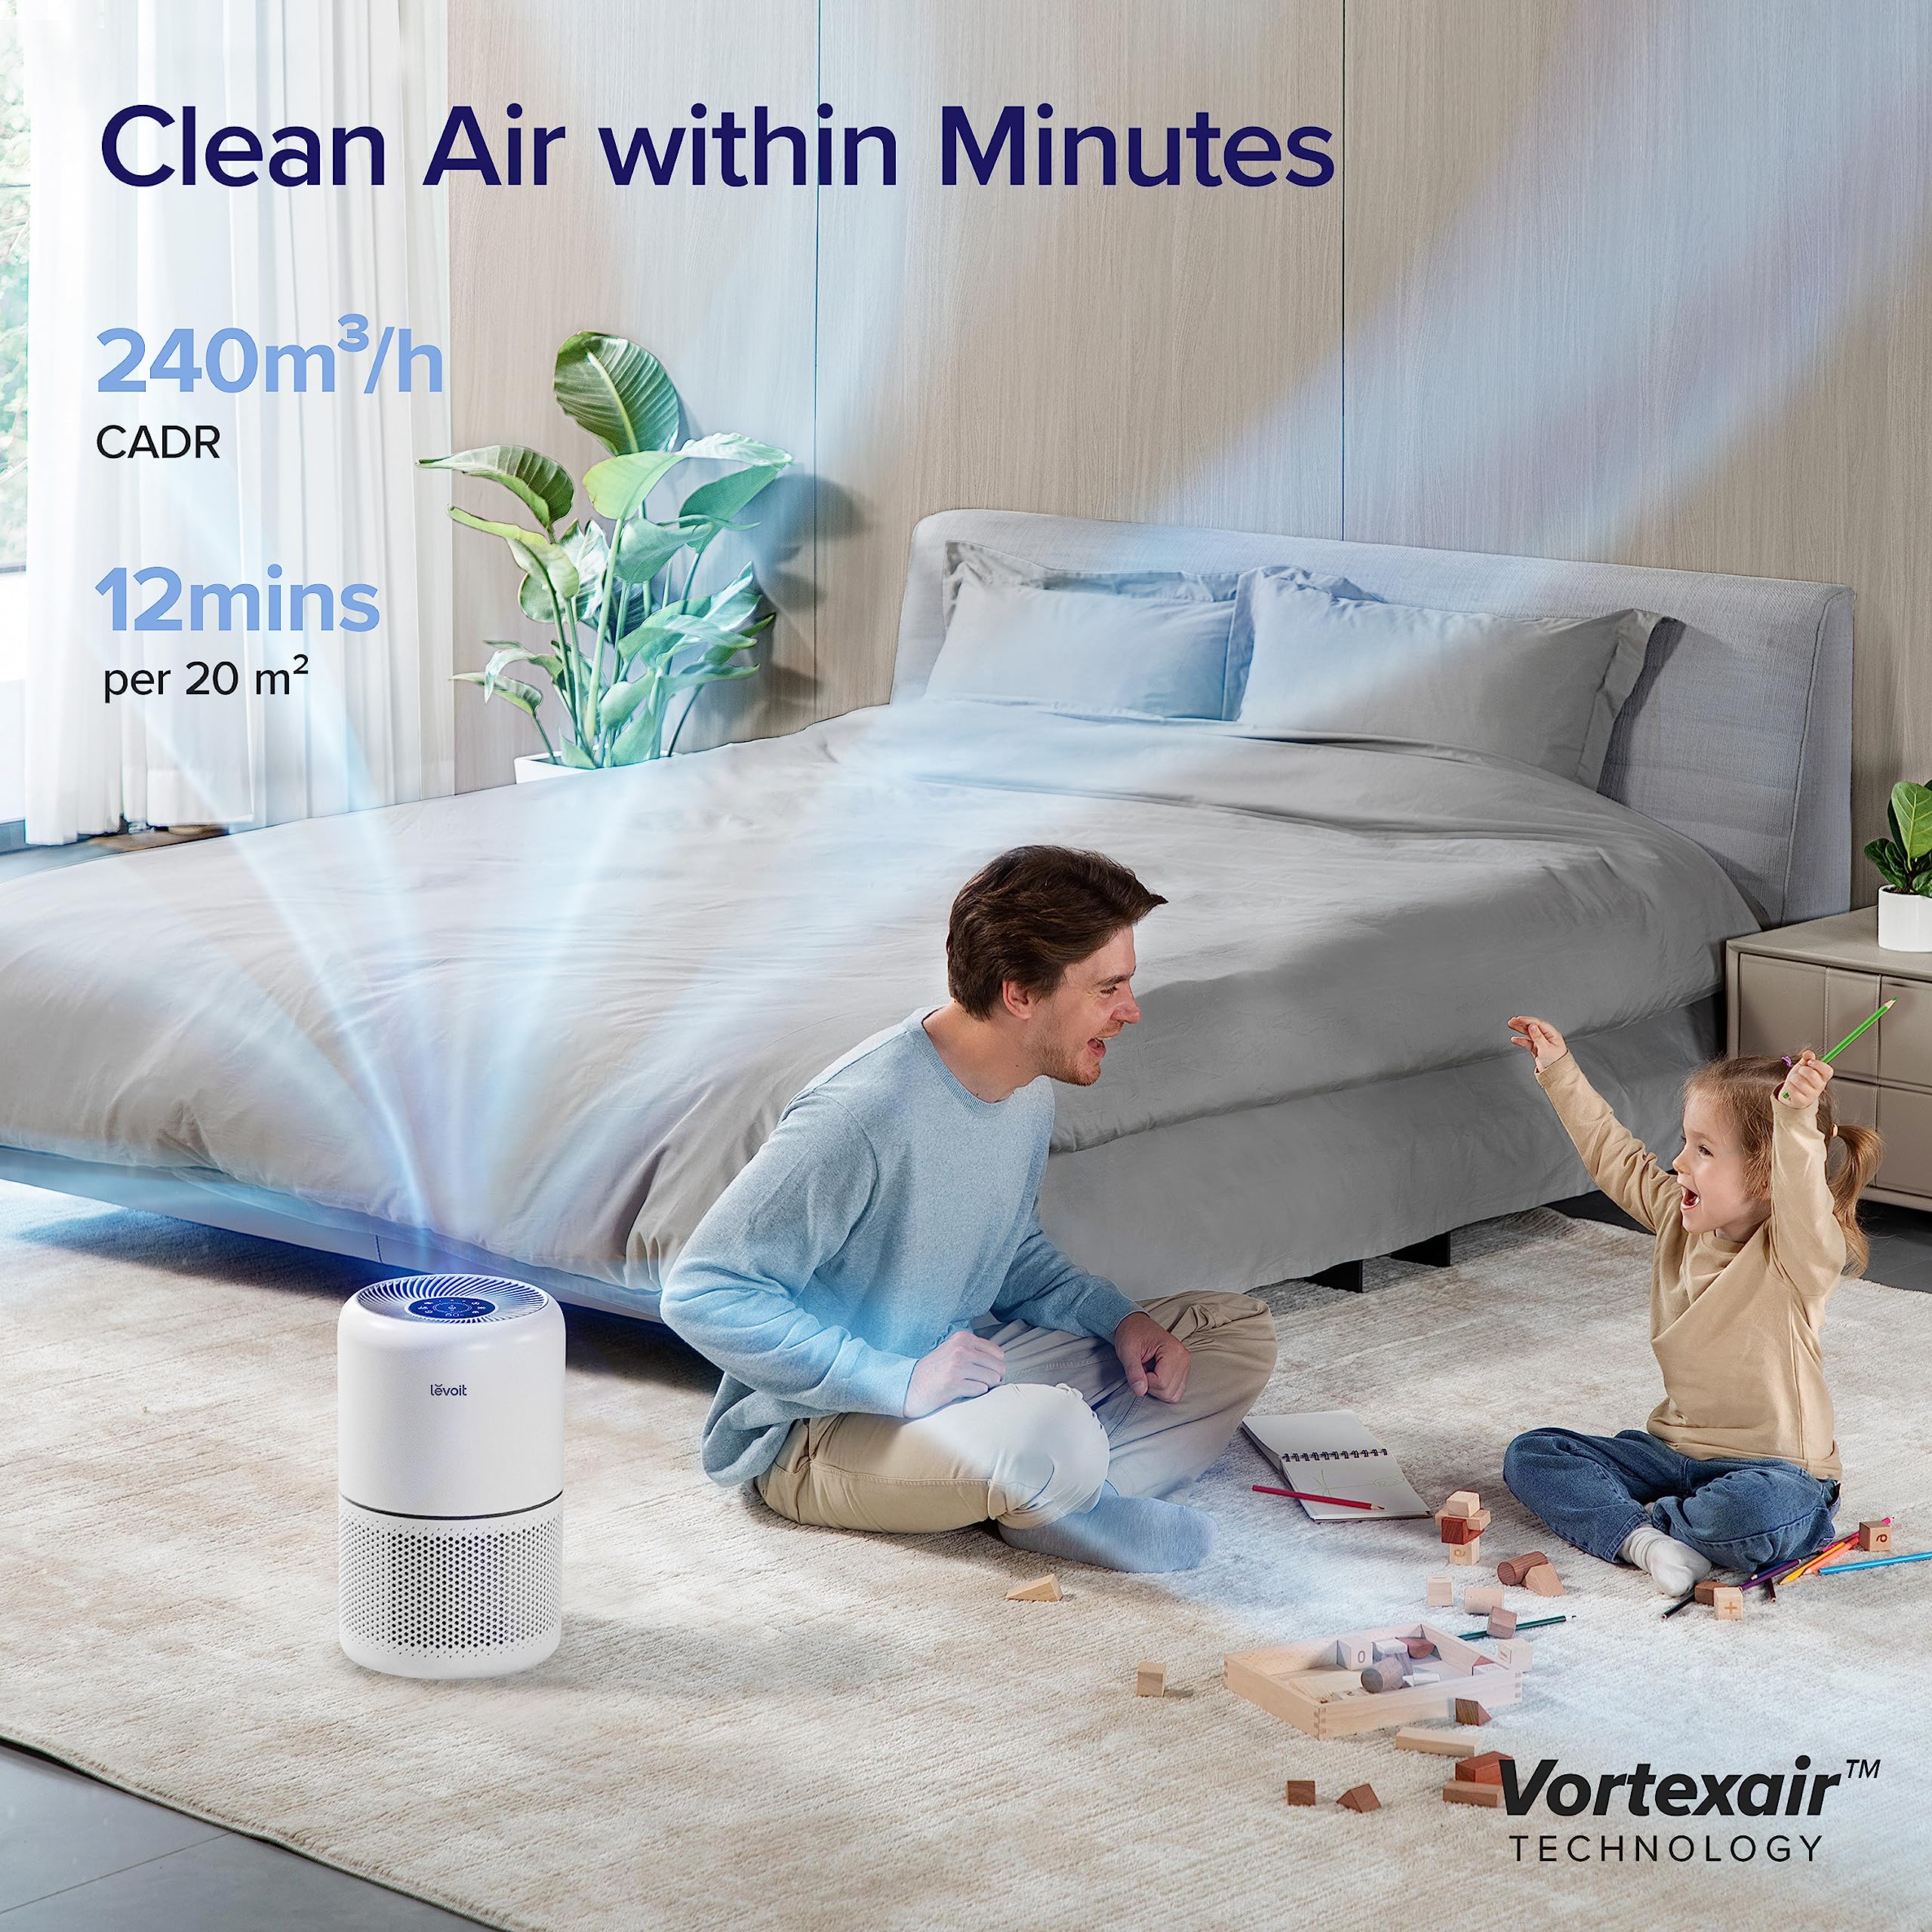 LEVOIT Smart Air Purifier for Home Bedroom, H13 HEPA Air Filter with Real Time Air Quality Sensor, Removes Pollen Allergies Dust Odours, Alexa Enabled Air Cleaner with Quiet Auto Mode, Core300S